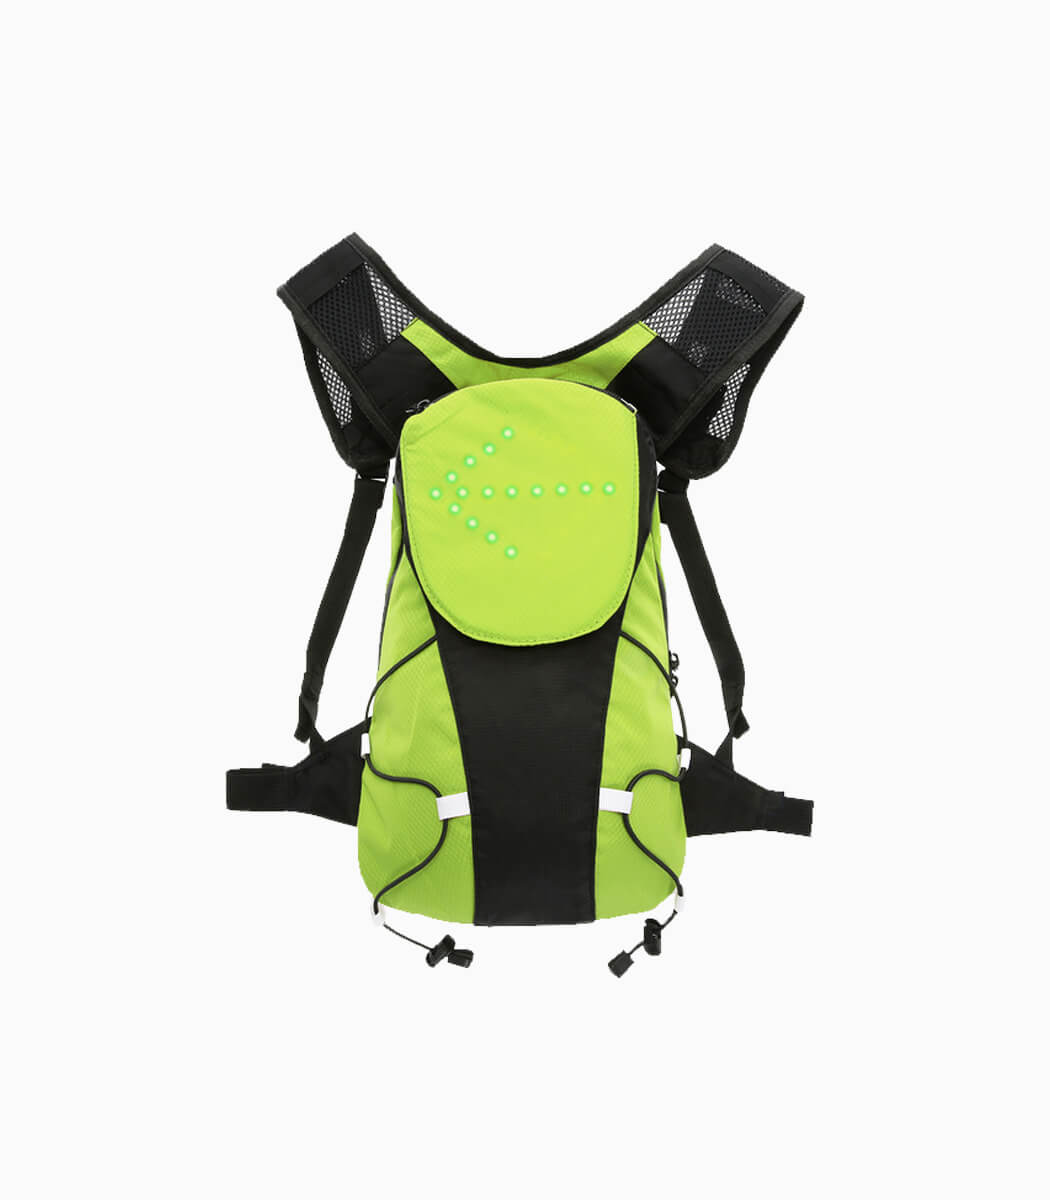 LIGHT ARMOR BP (LIME) cycling backpack with signal lights front